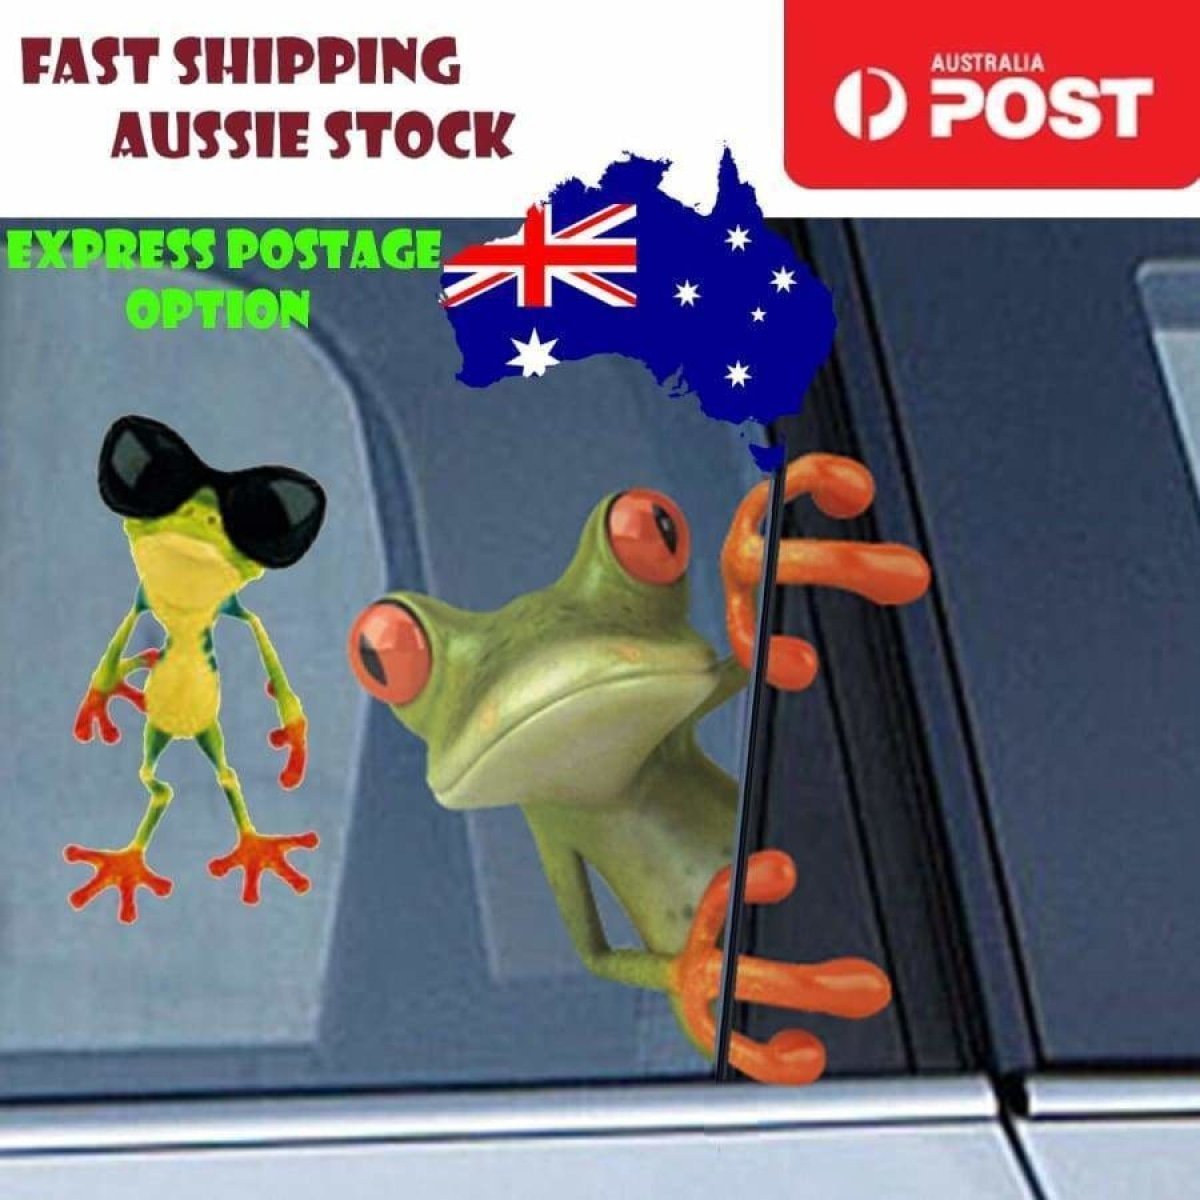 2x Frog Stickers 14-15cm Window Bathroom Toilet Seat Animal Decal Wall Tiles Car - A - - Asia Sell